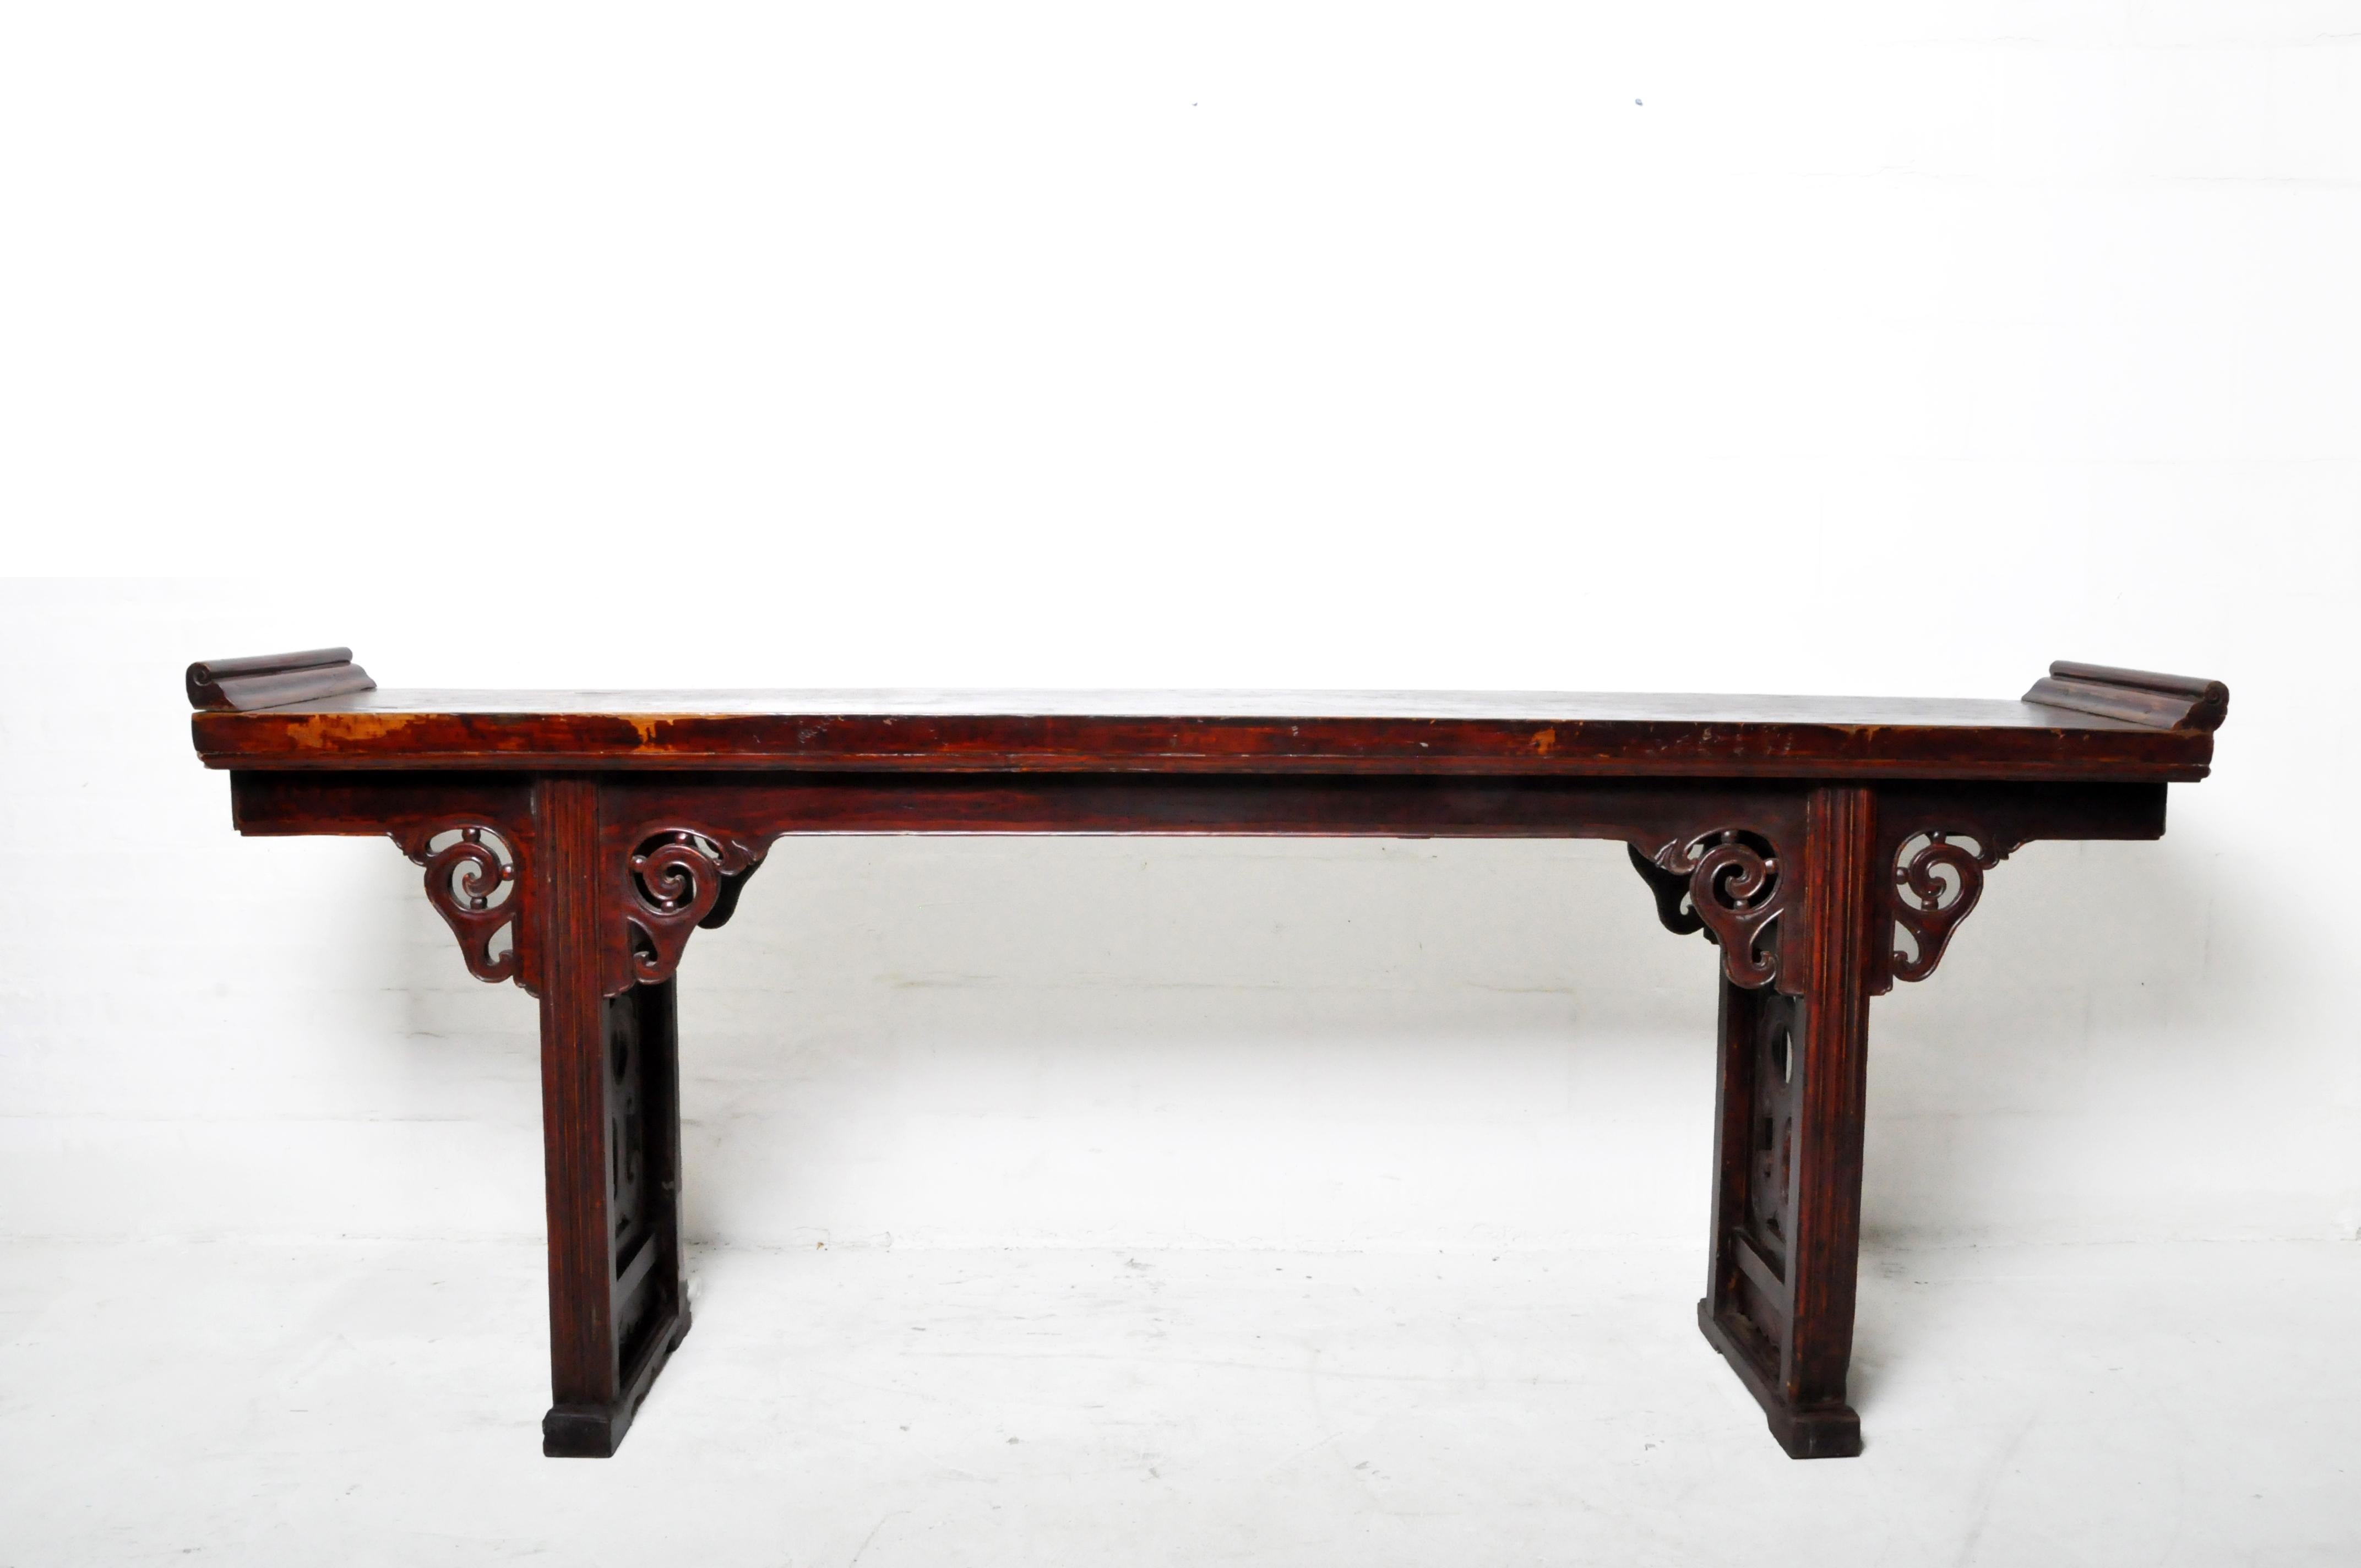 This long, elegant altar table once provided a place to burn incense or display valuable art objects. It may have been used in the reception hall of a private mansion or in an ancestral shrine. Its distinctive feature is its extreme simplicity -it